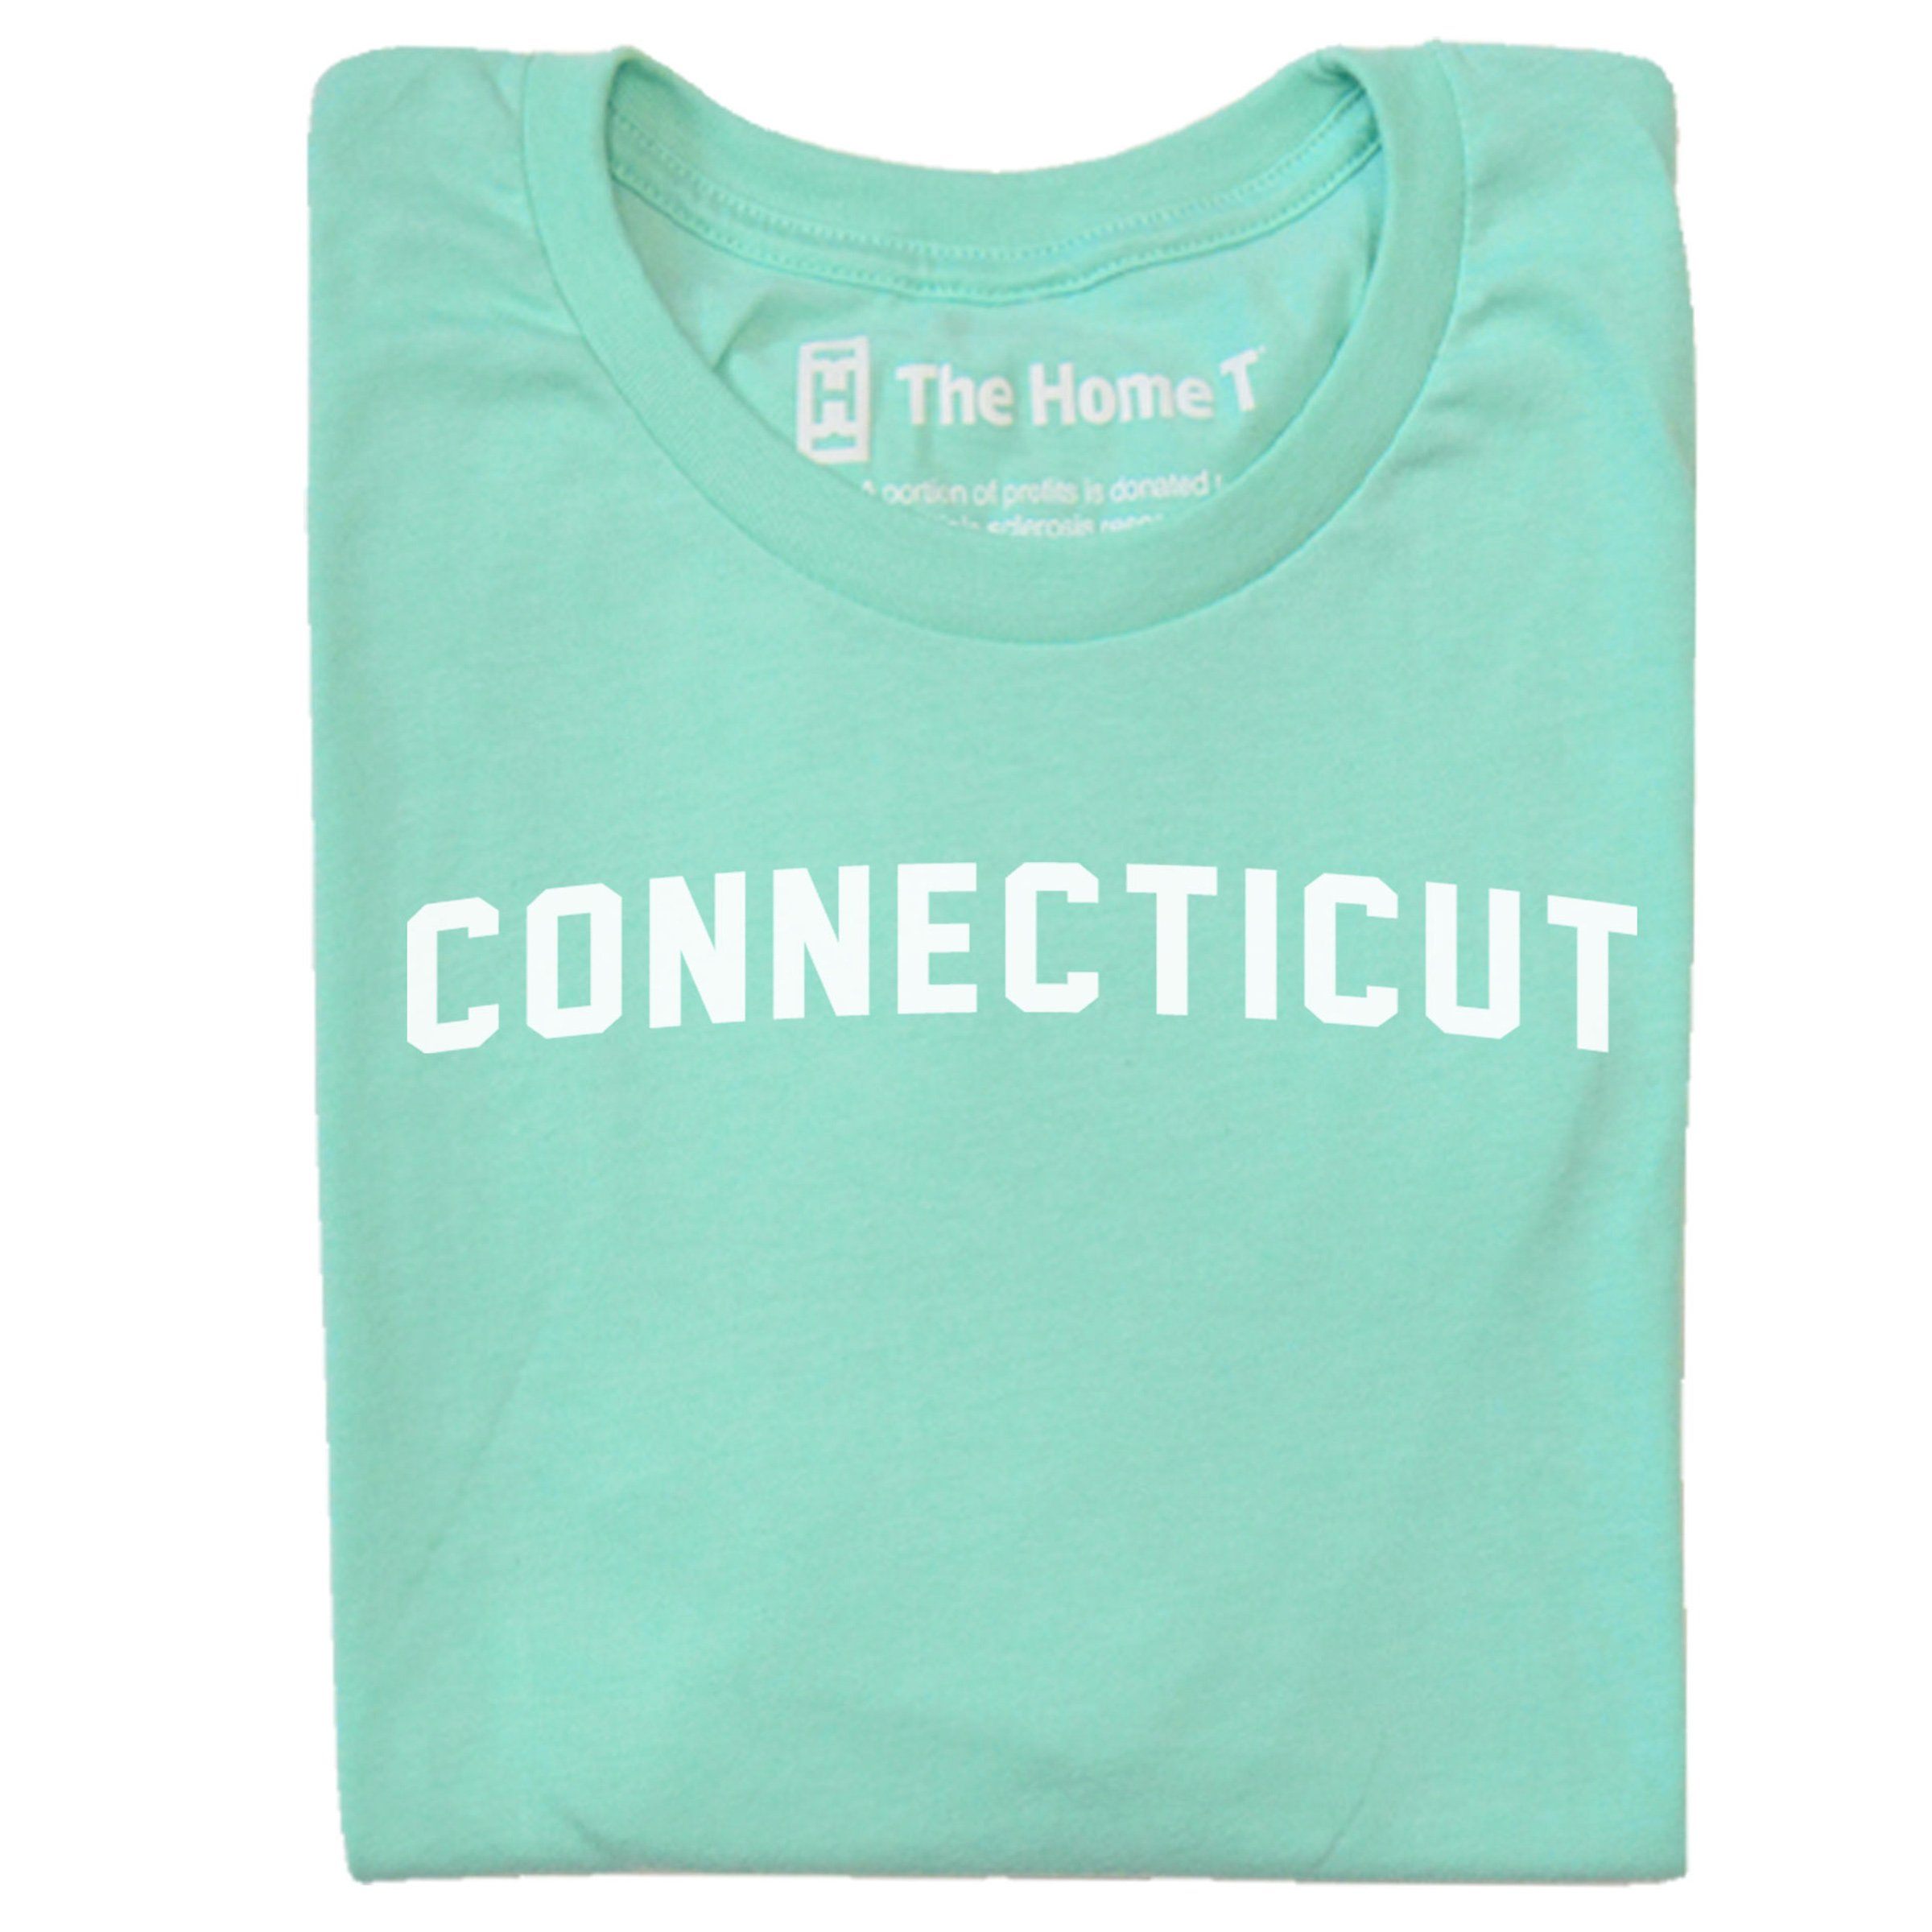 Connecticut Arched The Home T XS Mint